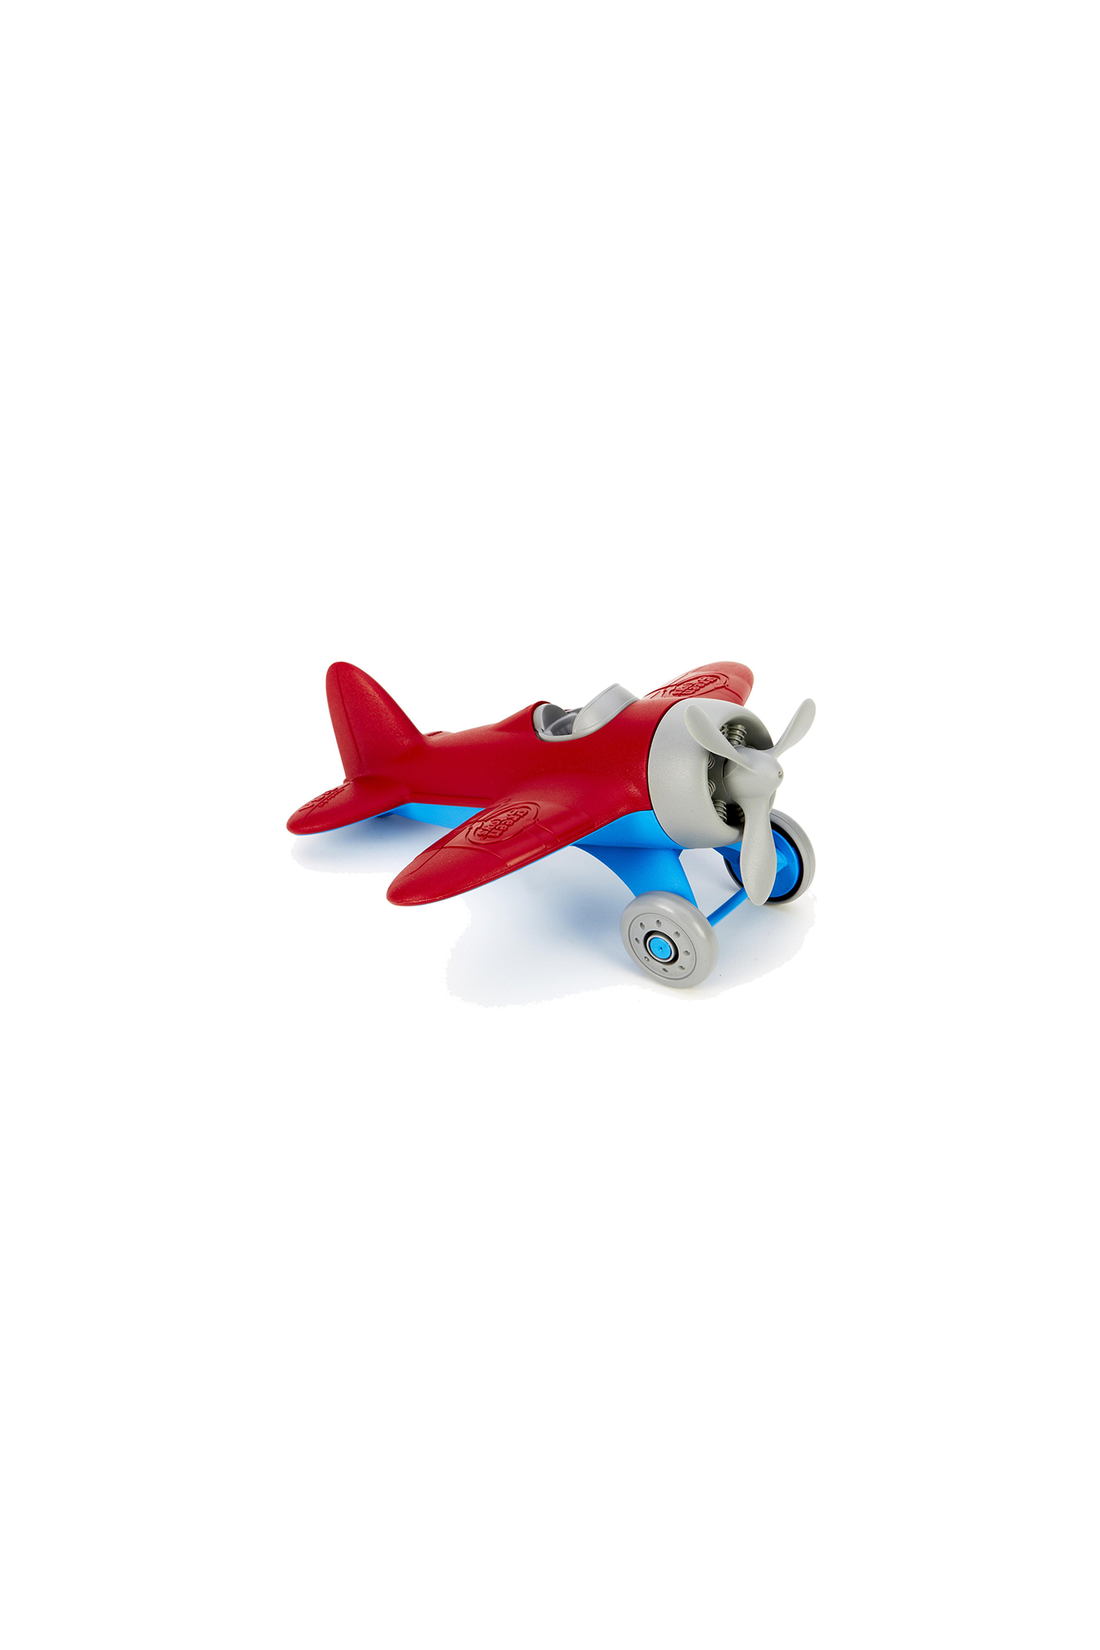 GREEN TOYS AIRPLANE RED - Sea Apple